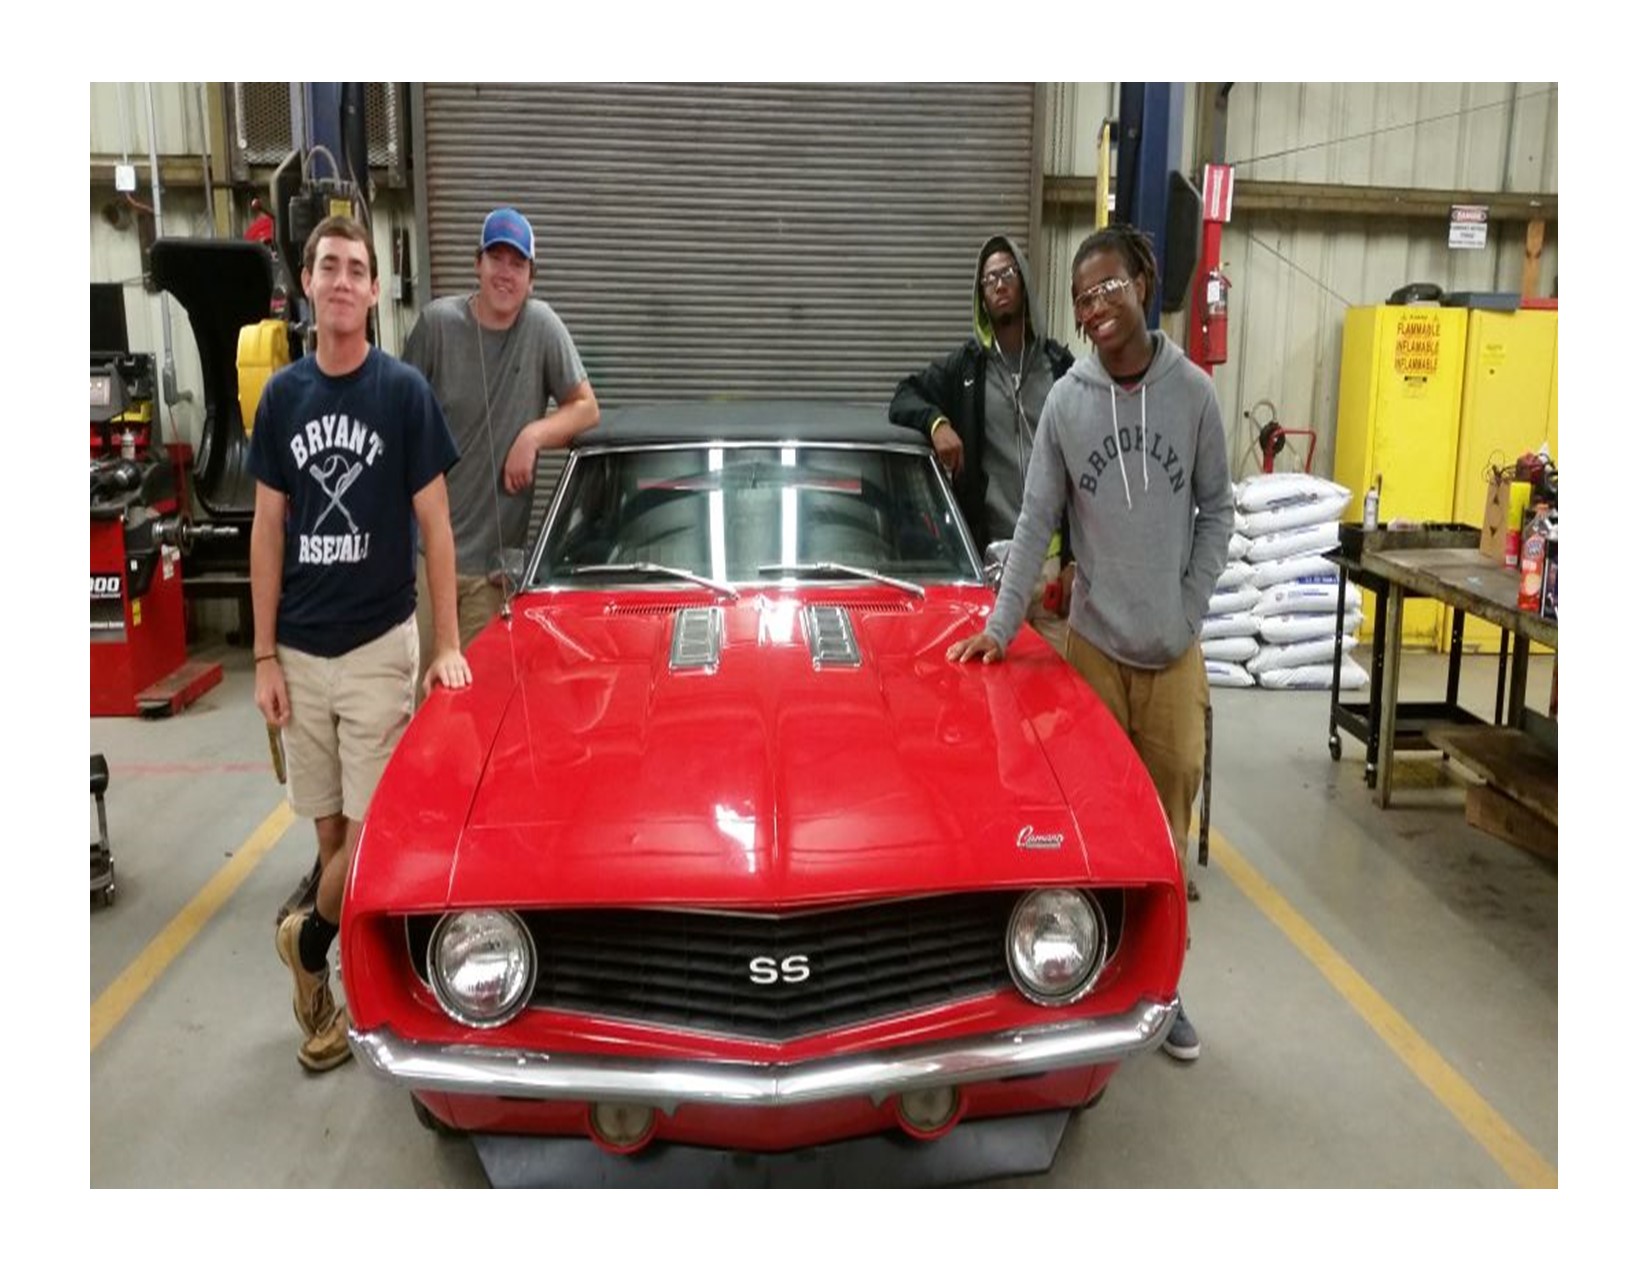 THE CLASS WORKED ON THIS RED CAR